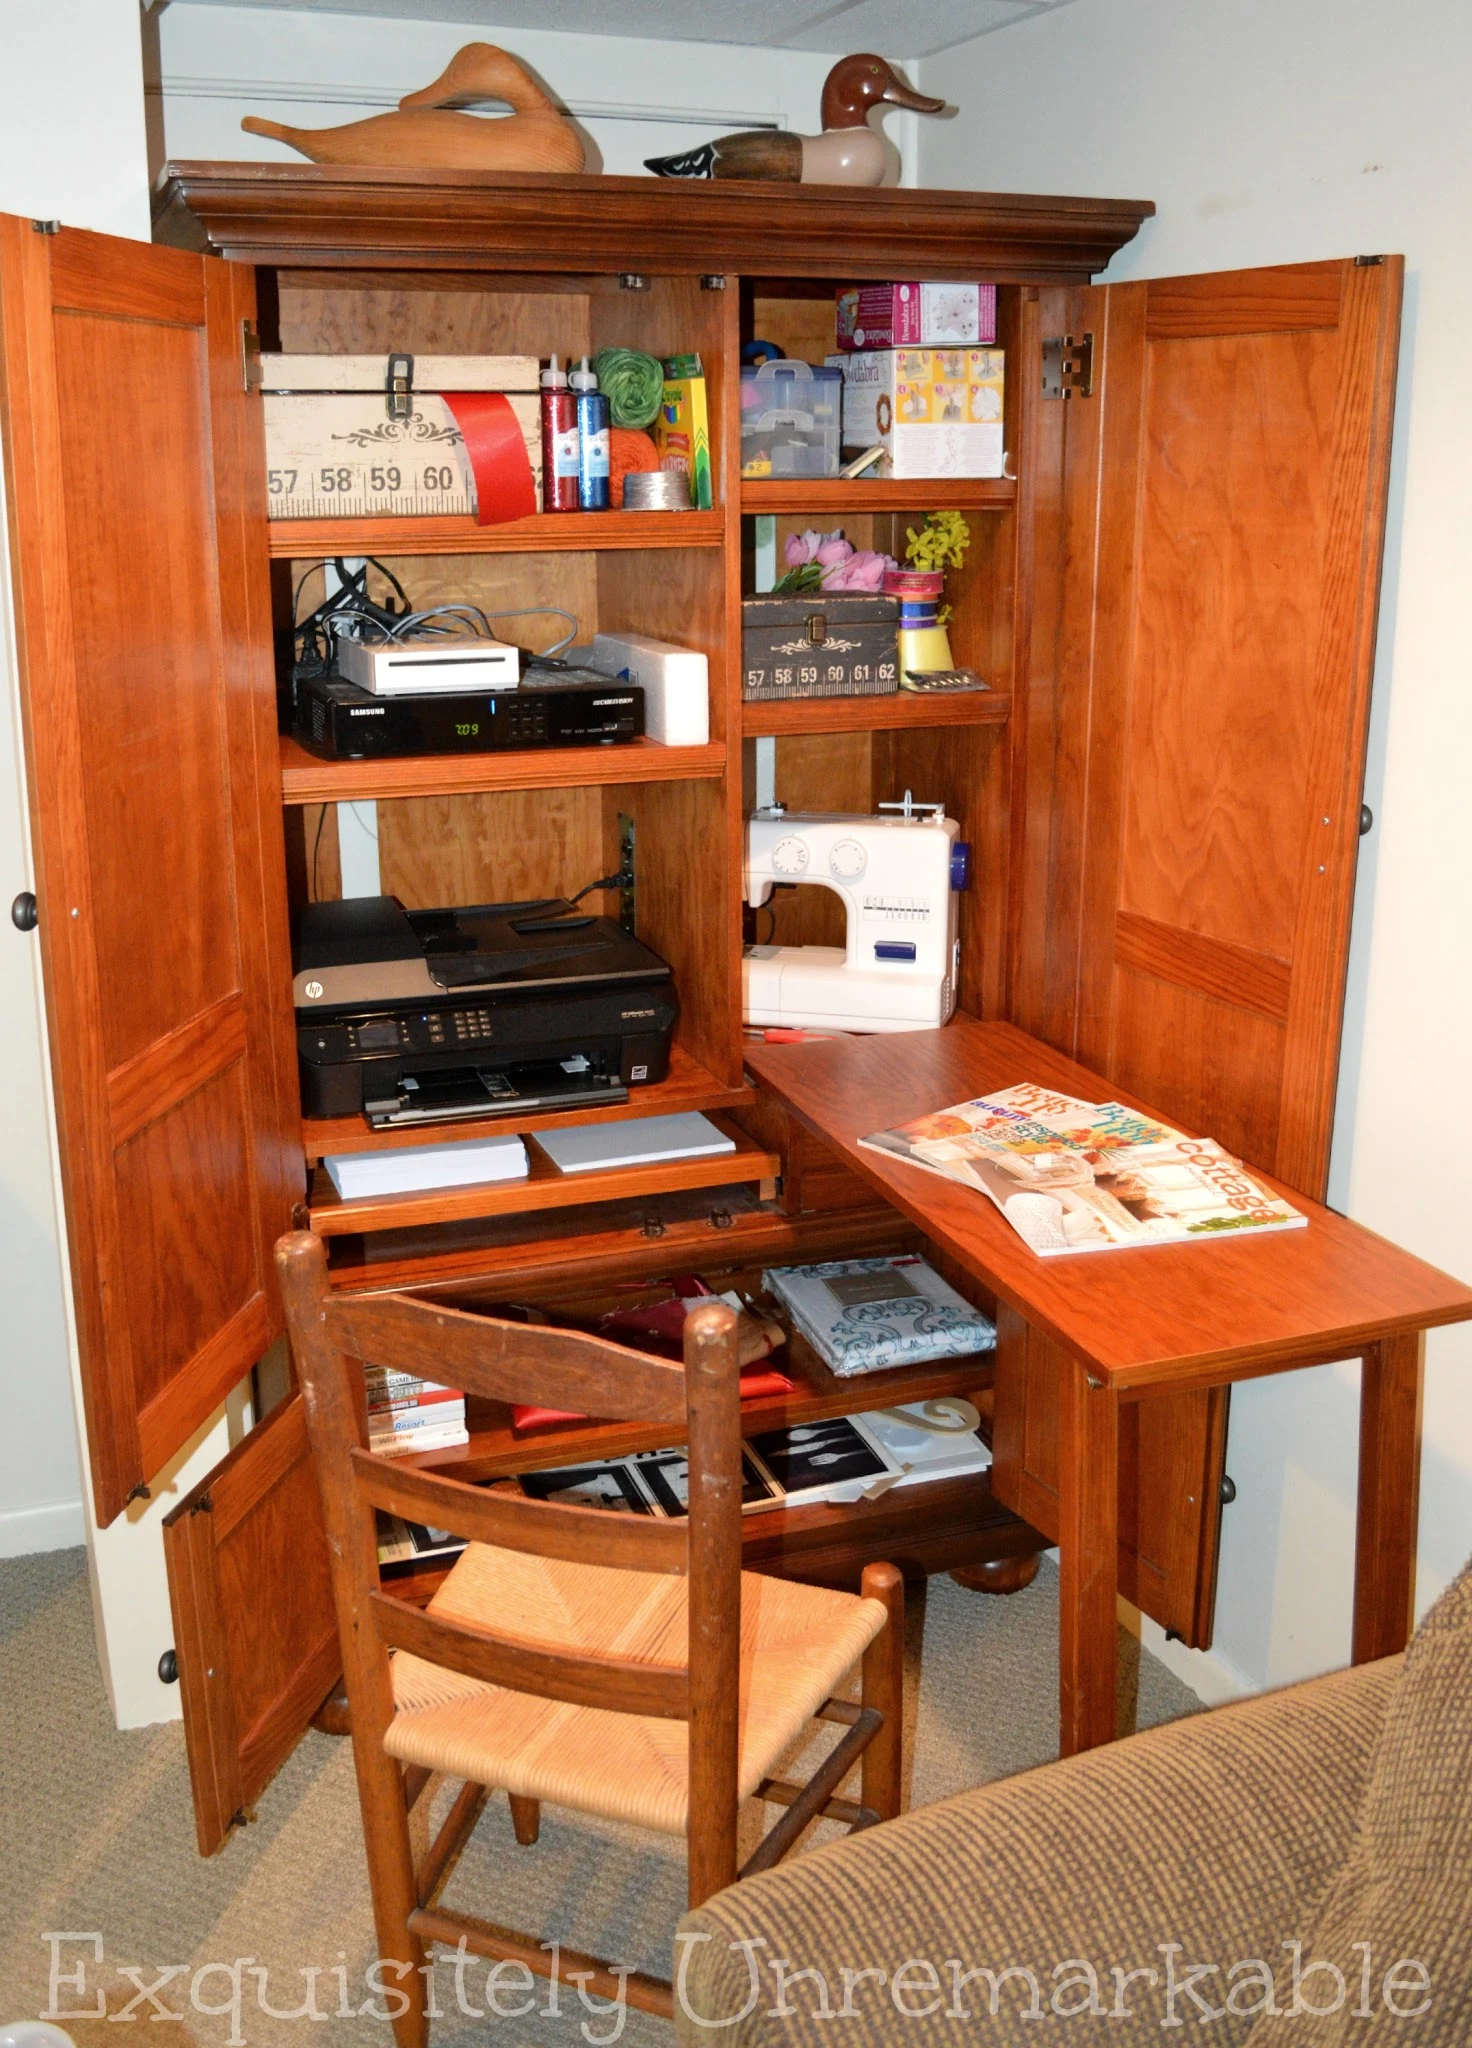 Using a computer armoire for craft supplies